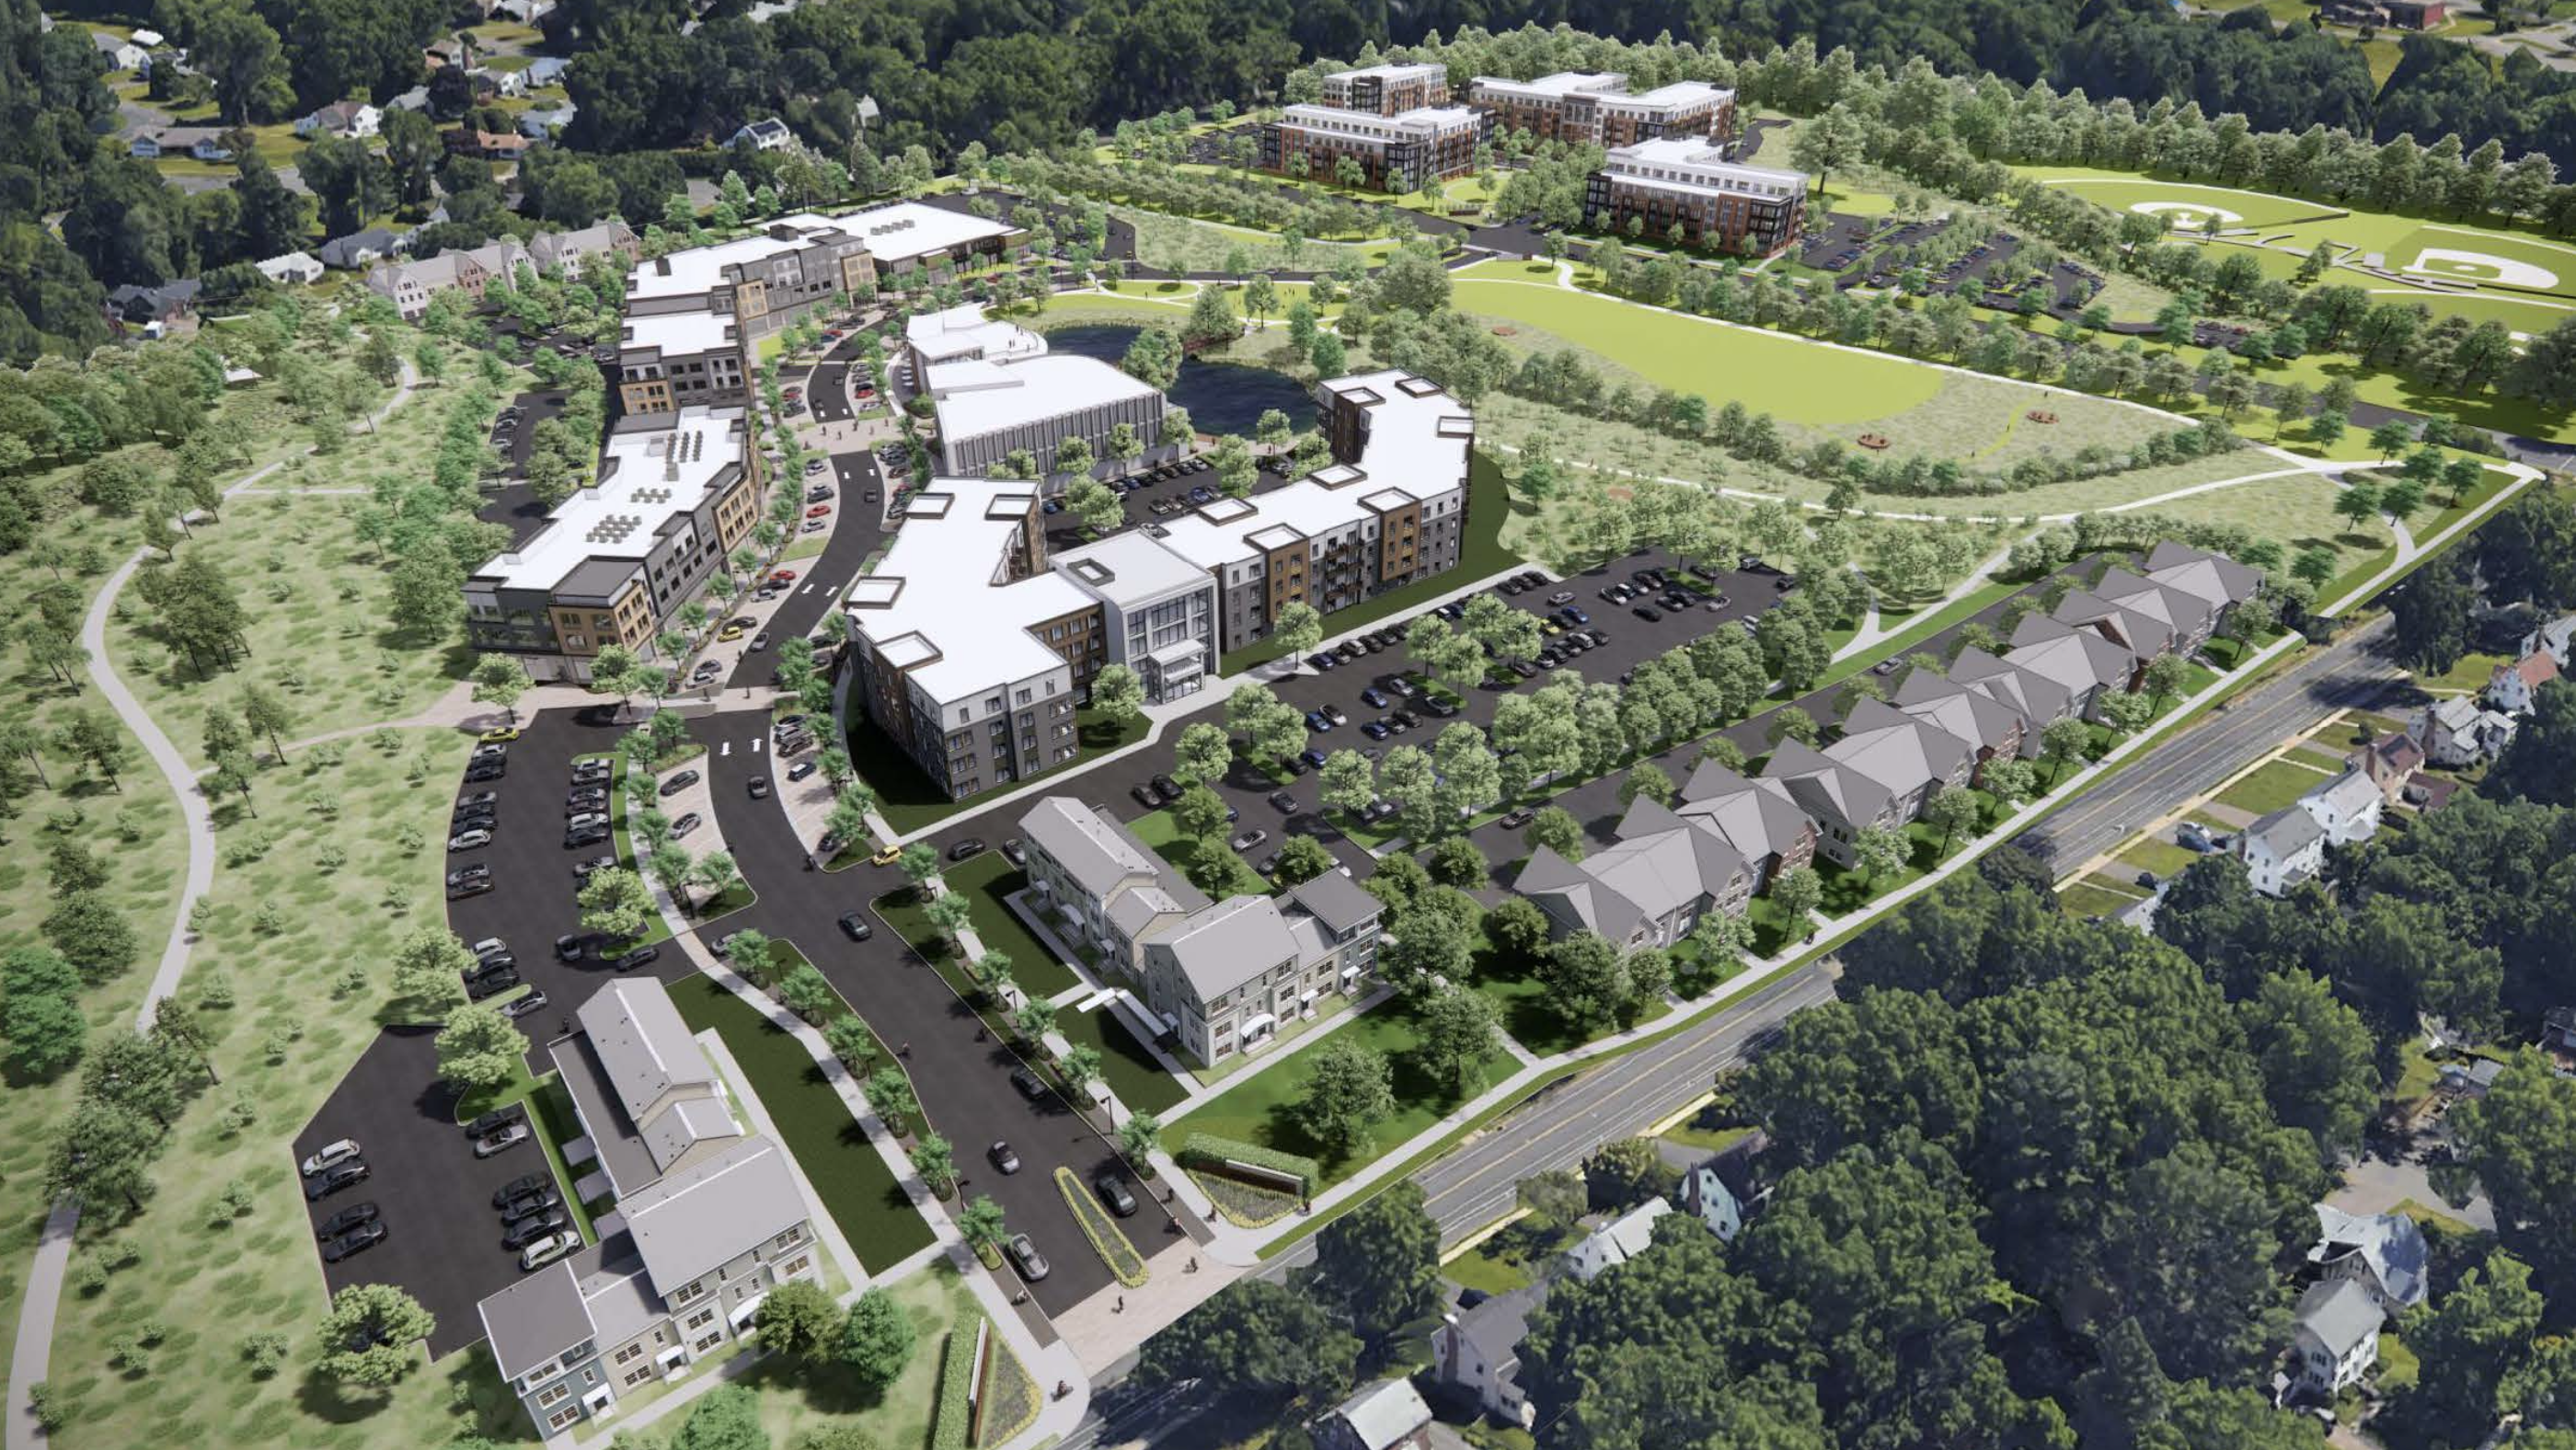 Many Questions Remain as West Hartford Design Review Advisory Committee  Reviews Plans for Former UConn Property - We-Ha